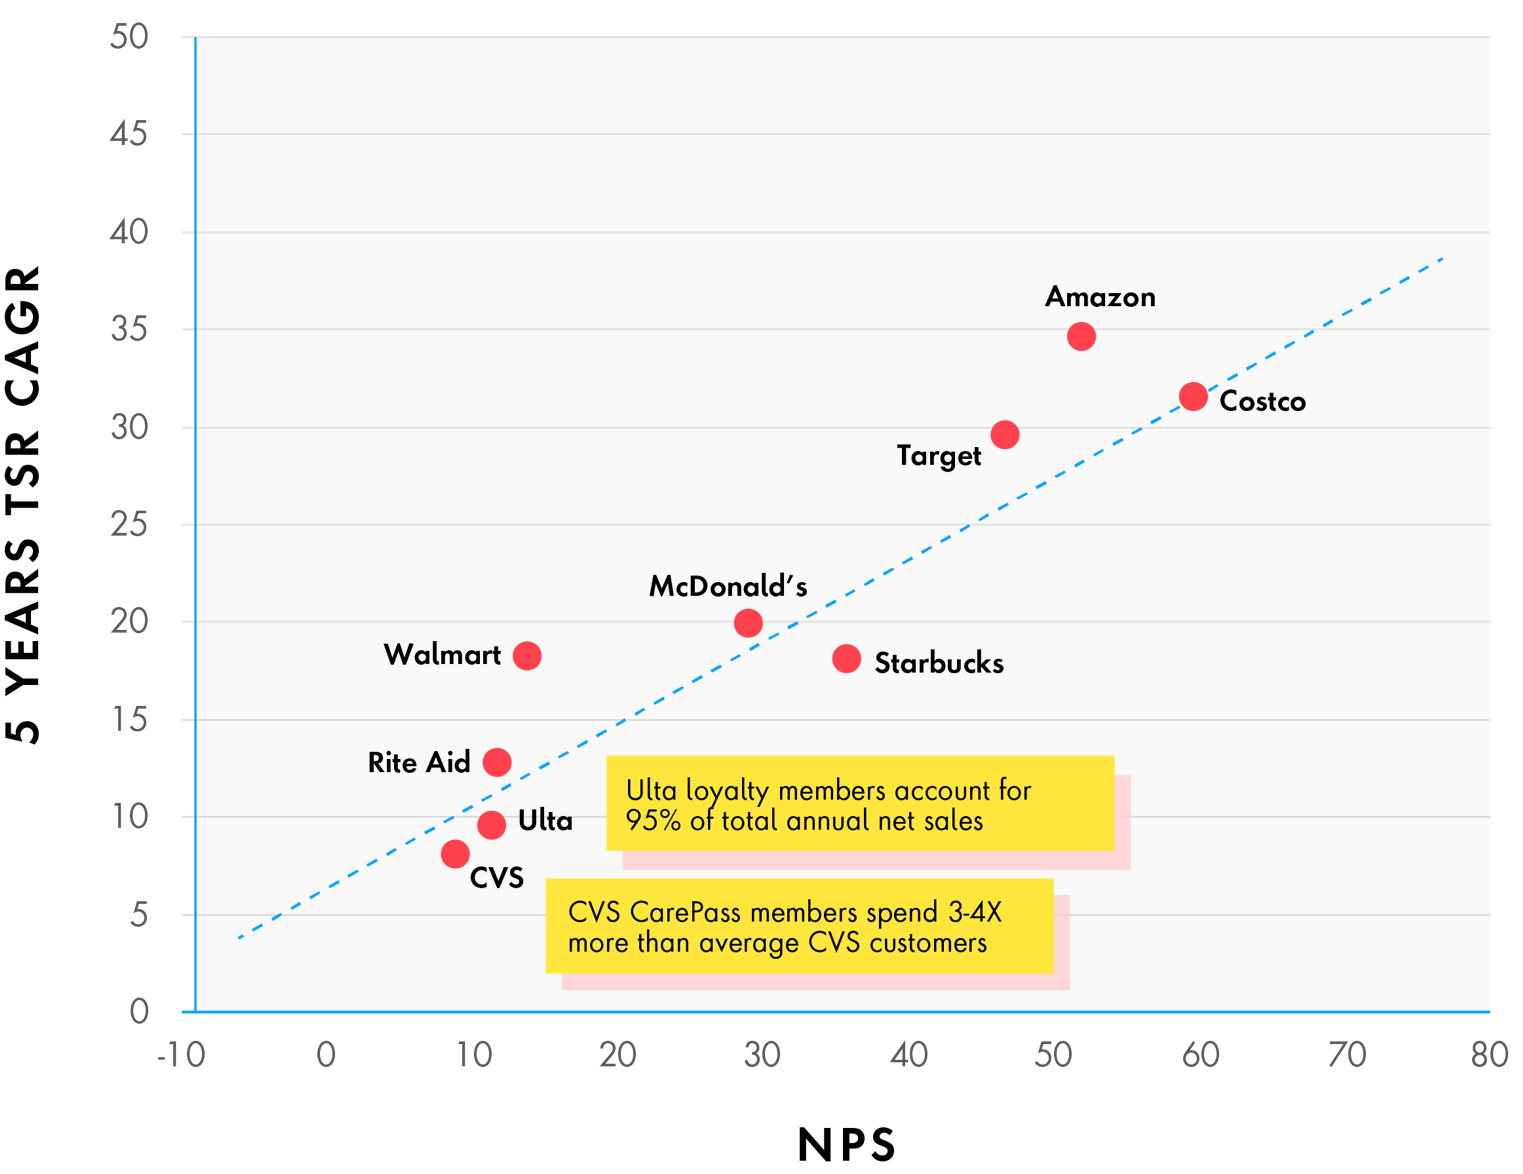 graph and chart depicting brands their net promoter scores at varying levels over 5 years